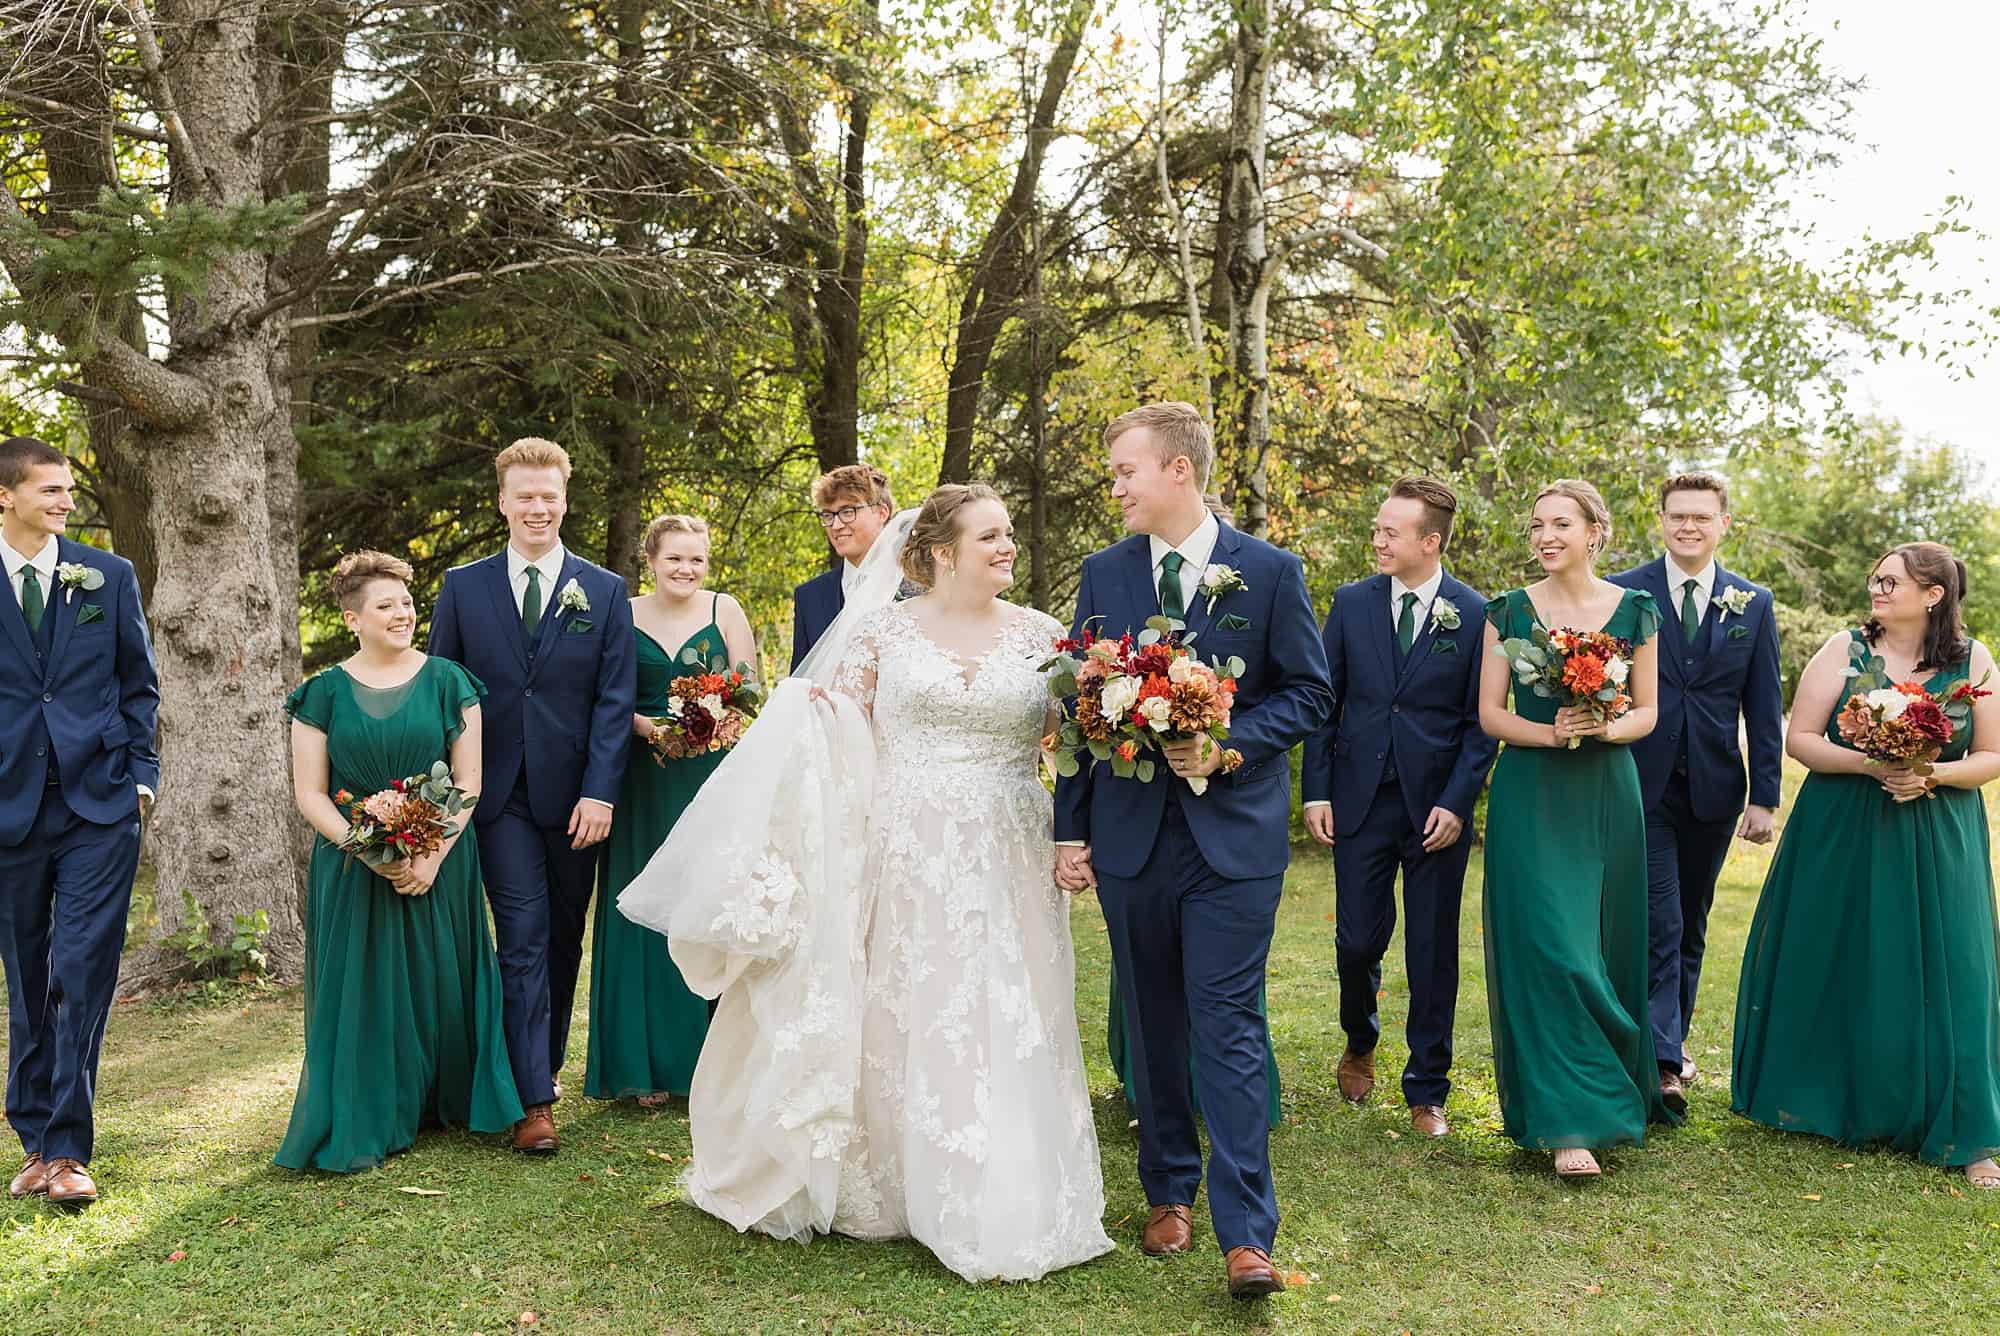 Wedding party walks together at Orchard Glen Park during the fall